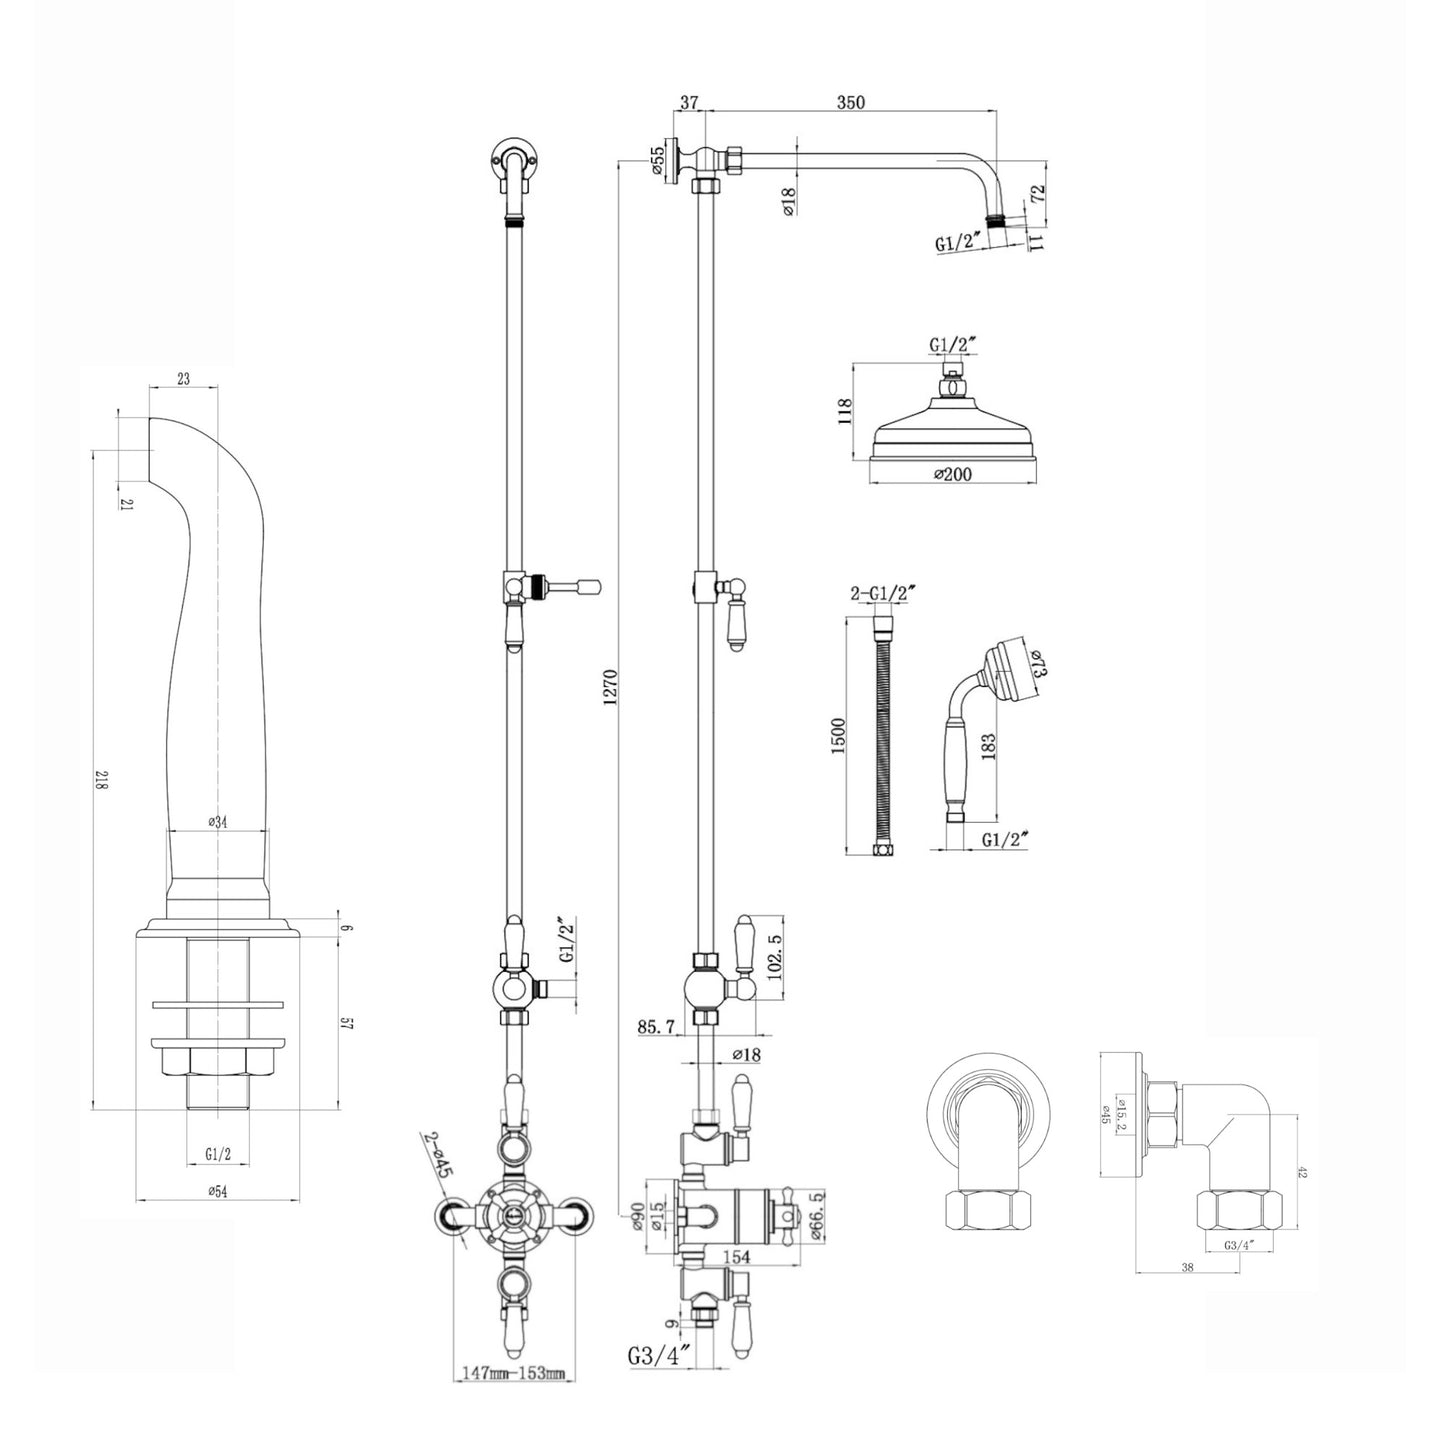 Downton Exposed Traditional Thermostatic Shower Set 3 Outlet, Incl. Triple Shower Valve, Rigid Riser Rail, 200mm Shower Head, Handset & Bath Filler - English Gold And White